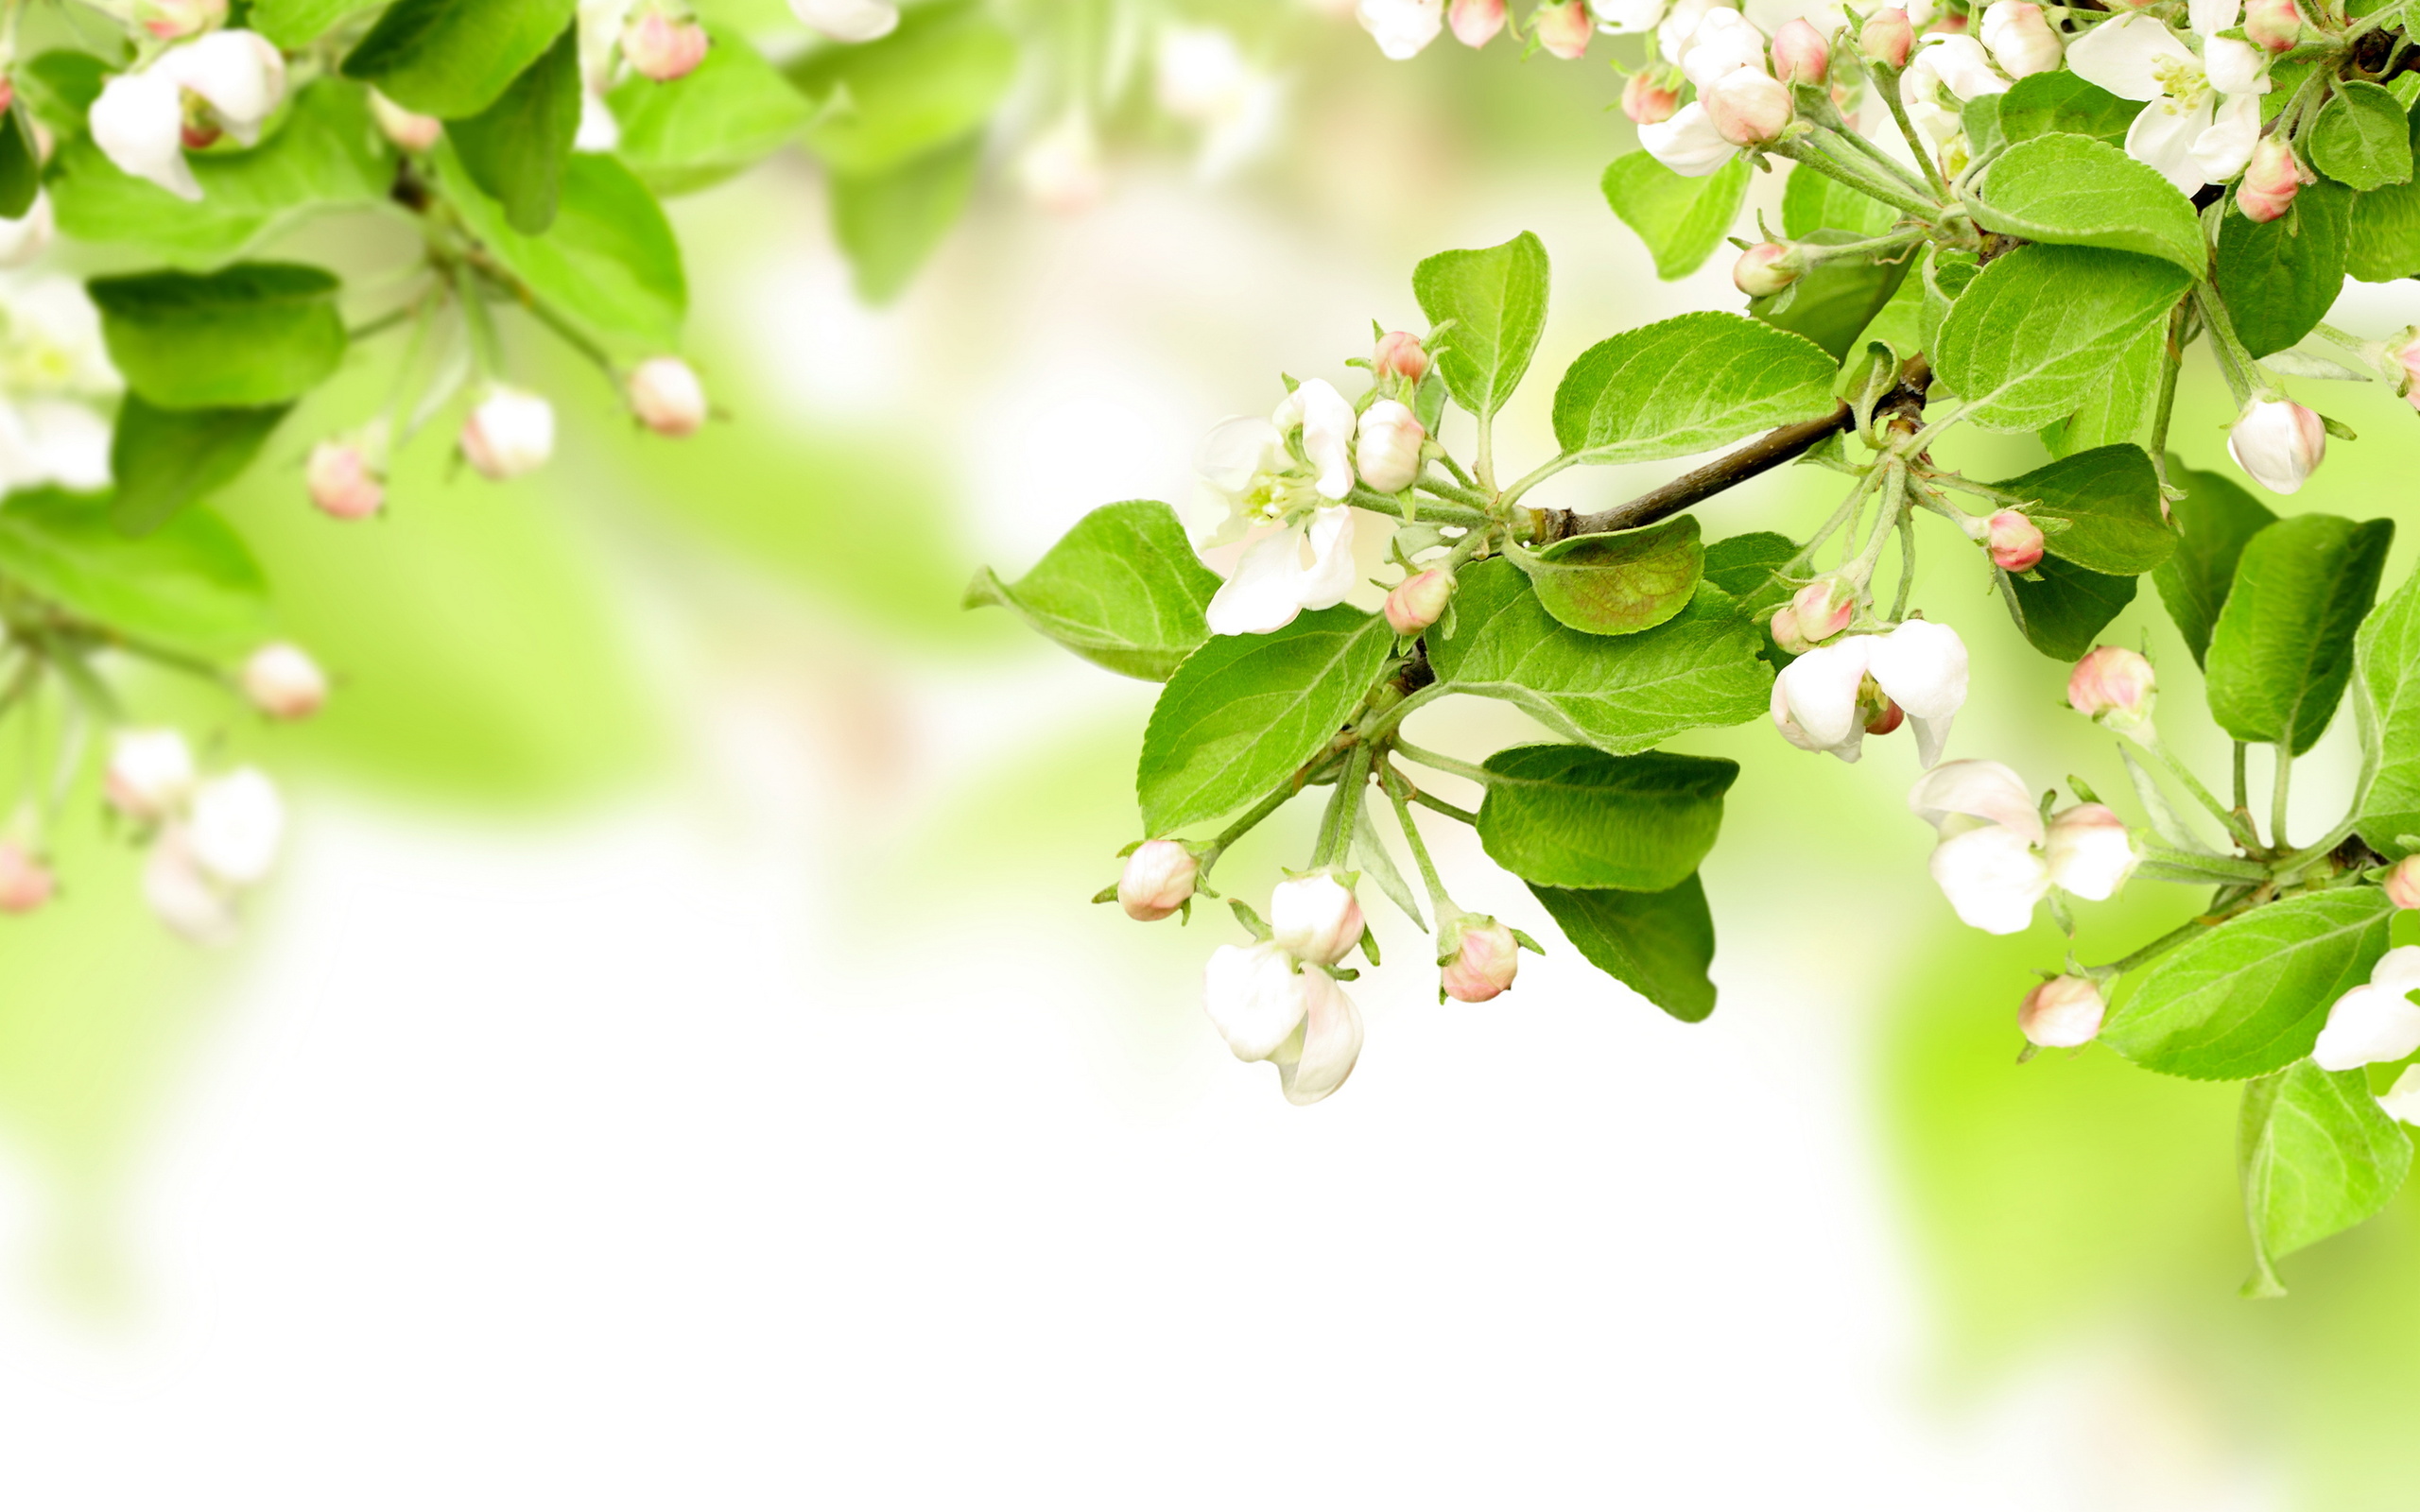 Leaves spring flowers apples branches blossom wallpaper 2560x1600 2560x1600